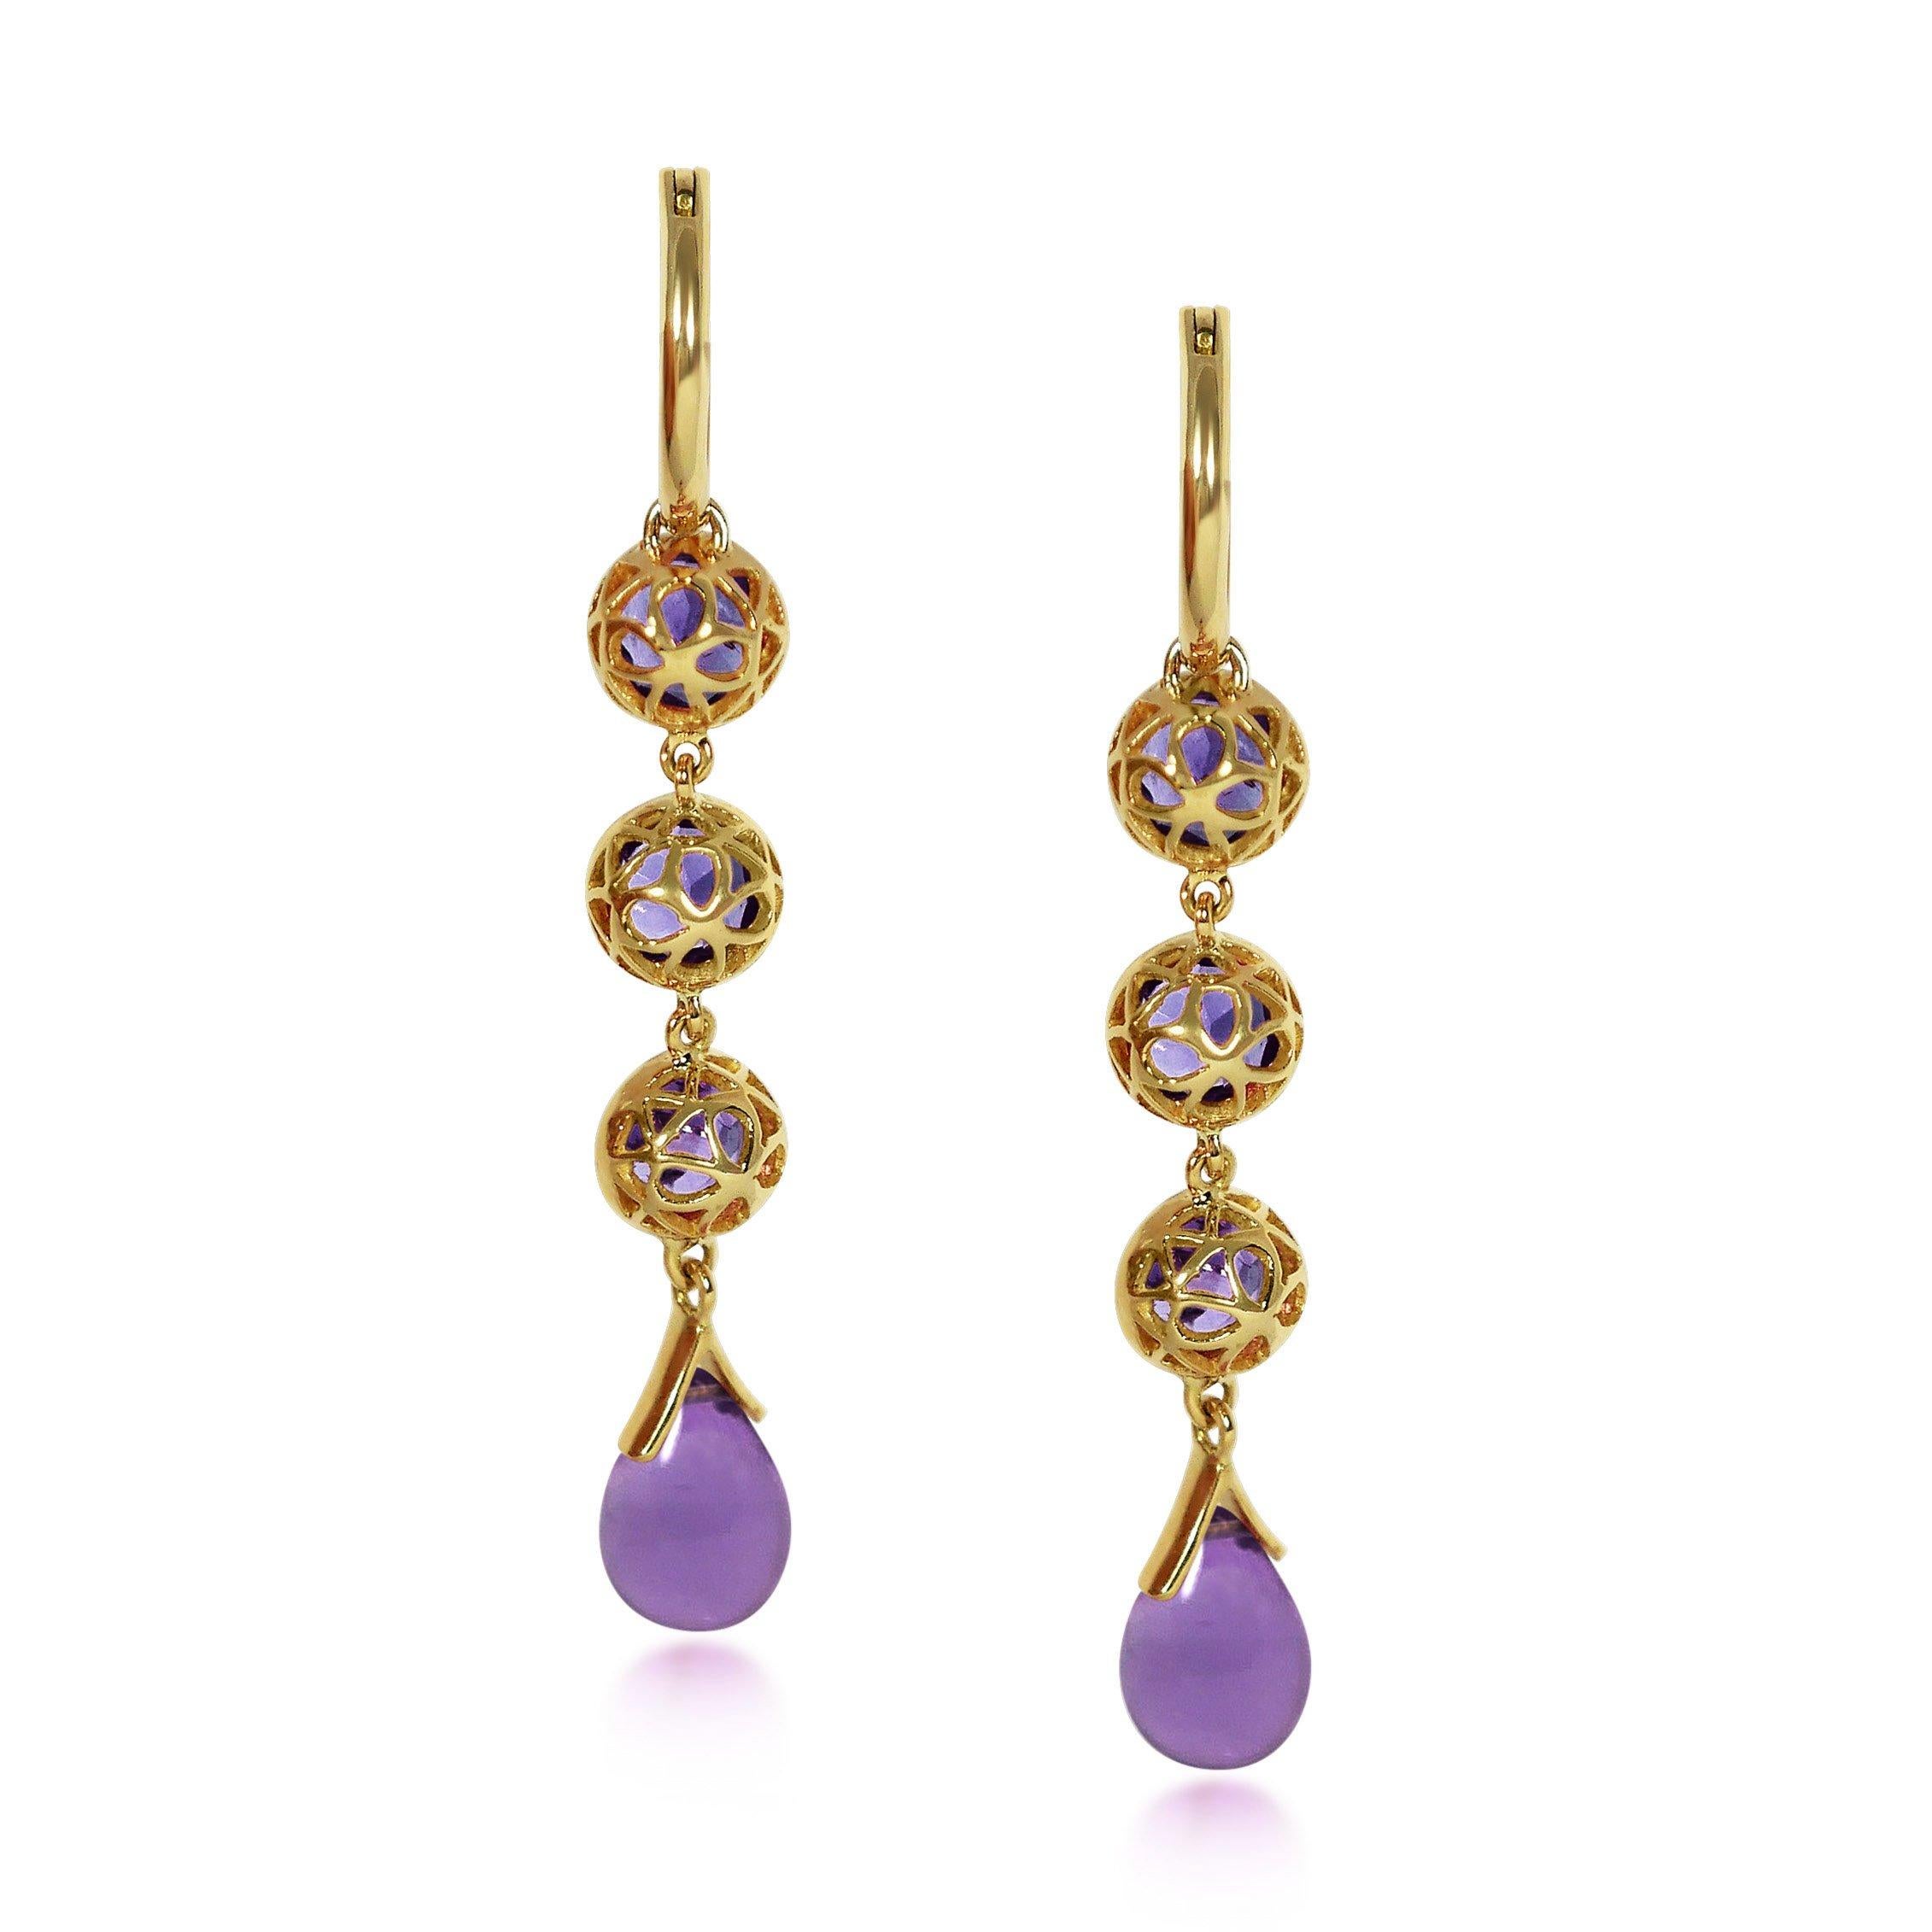 Handcrafted 1.50 Carats Amethysts 18 Karat Yellow Gold Drop Earrings. Our stone cascade-like earrings are an elegant statement underlined by romantic dancing drops carved in Amethyst under a set of 6mm round cut Amethyst stones encased in our iconic